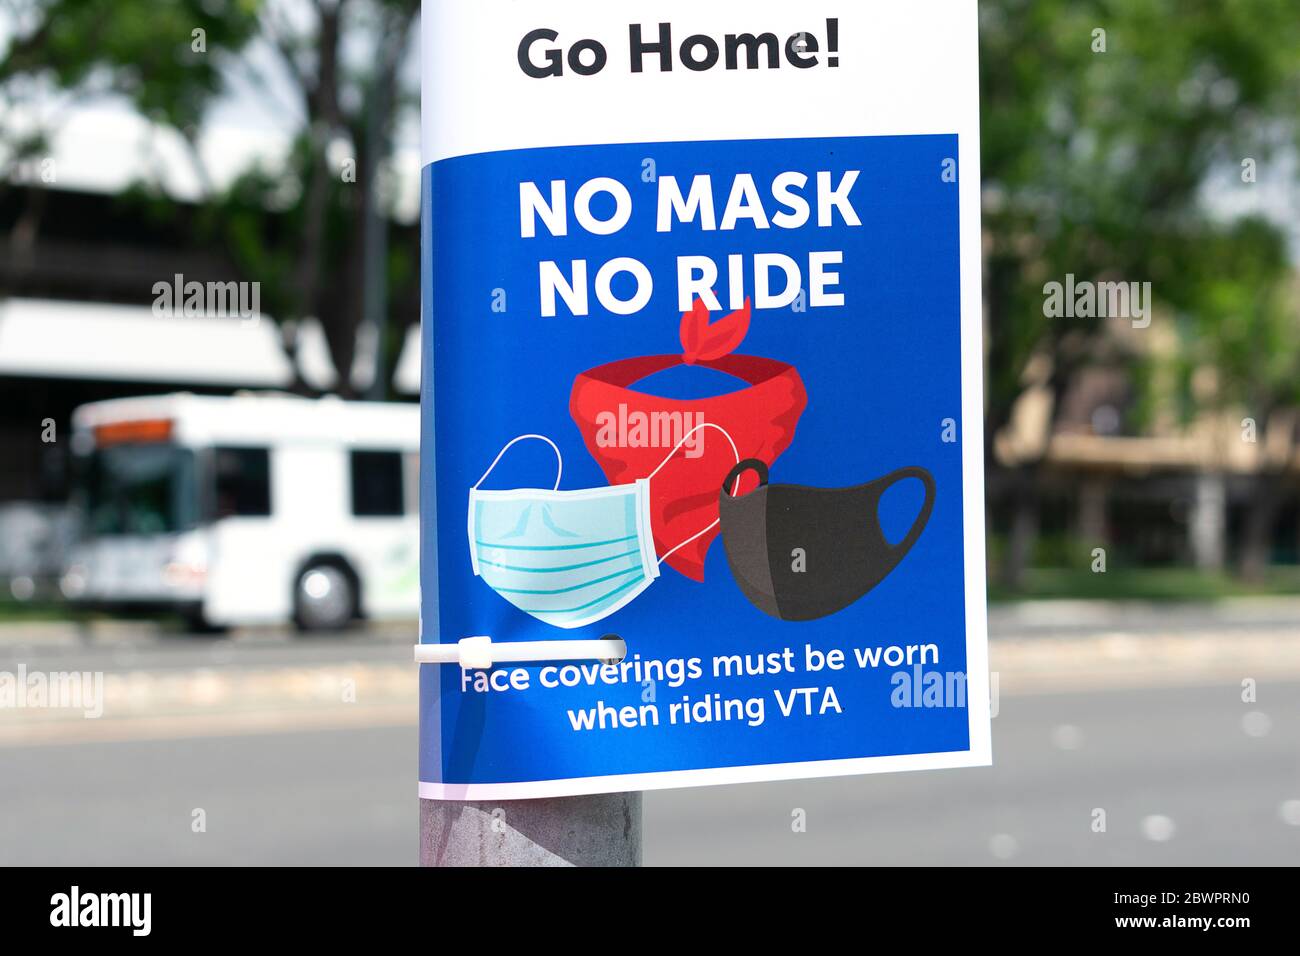 No Mask No Ride notice requesting public transportation passengers to use cloth face coverings to help slow the spread of COVID-19 - San Jose, Califor Stock Photo